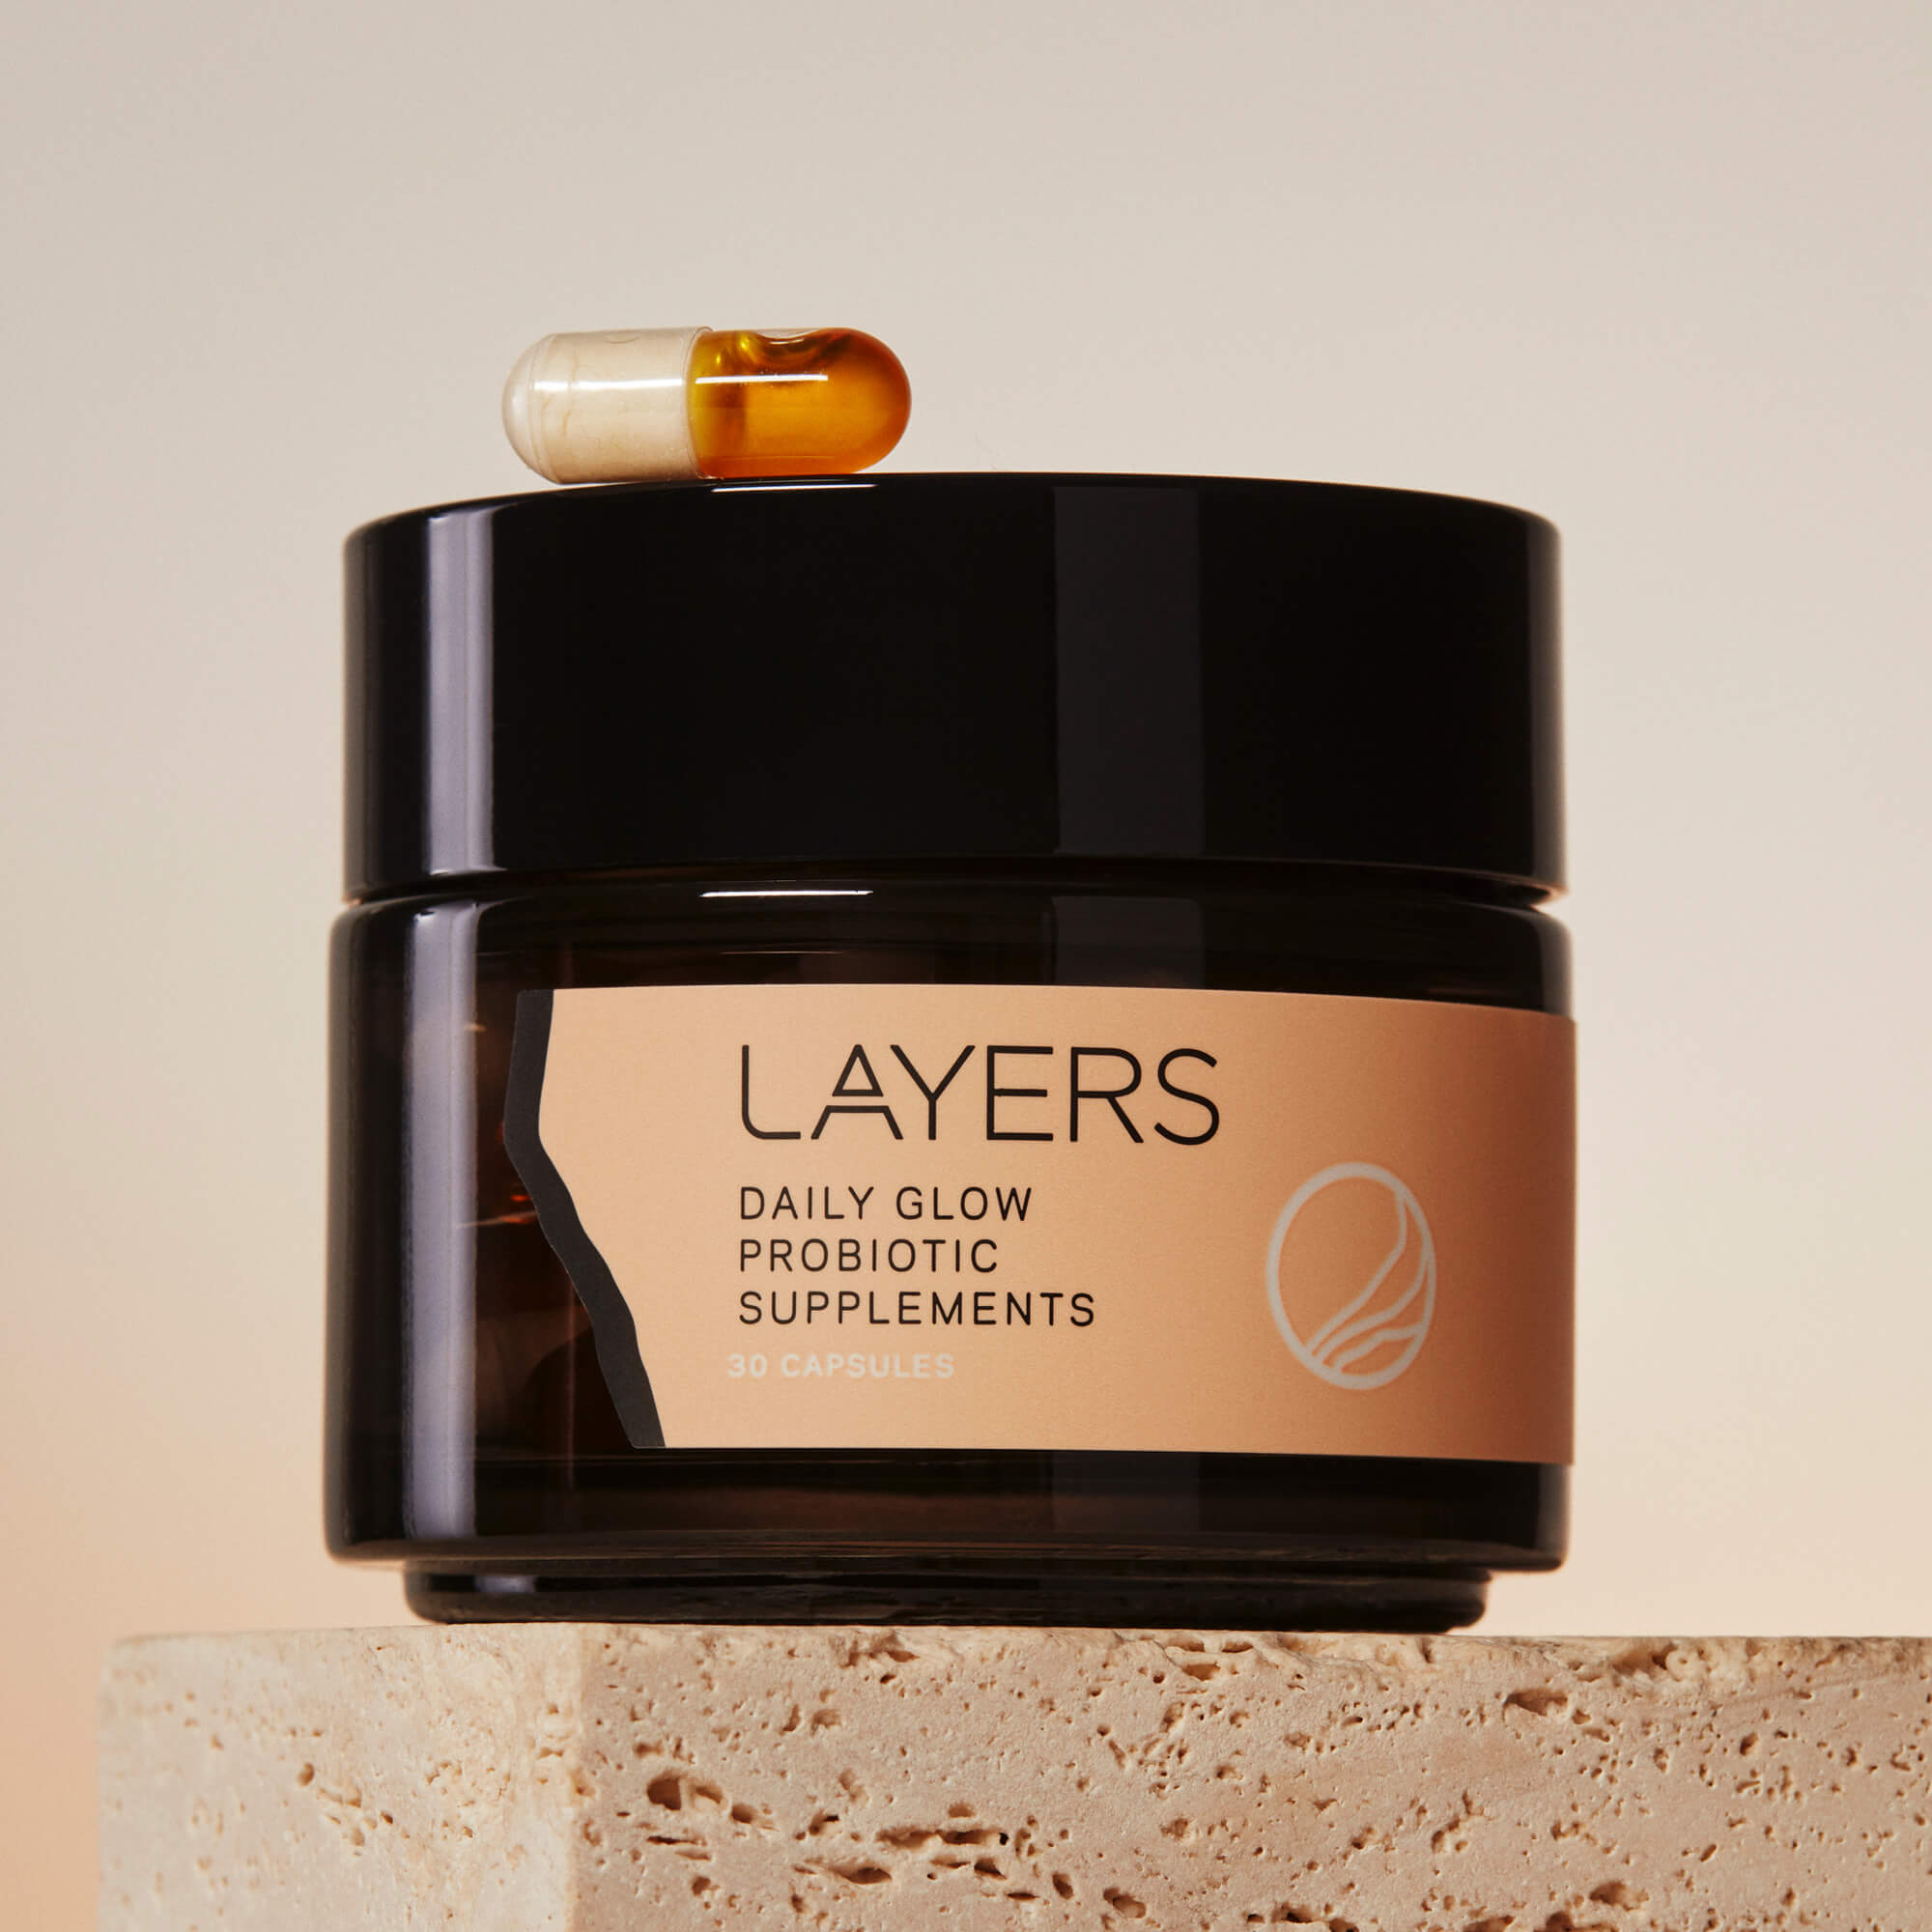 Layers Probiotic Skincare Daily Glow Probiotic Supplements. Semi-Transparent black glass jar with 30 dual-sided capsules. For dry, oily, and combination skin. 